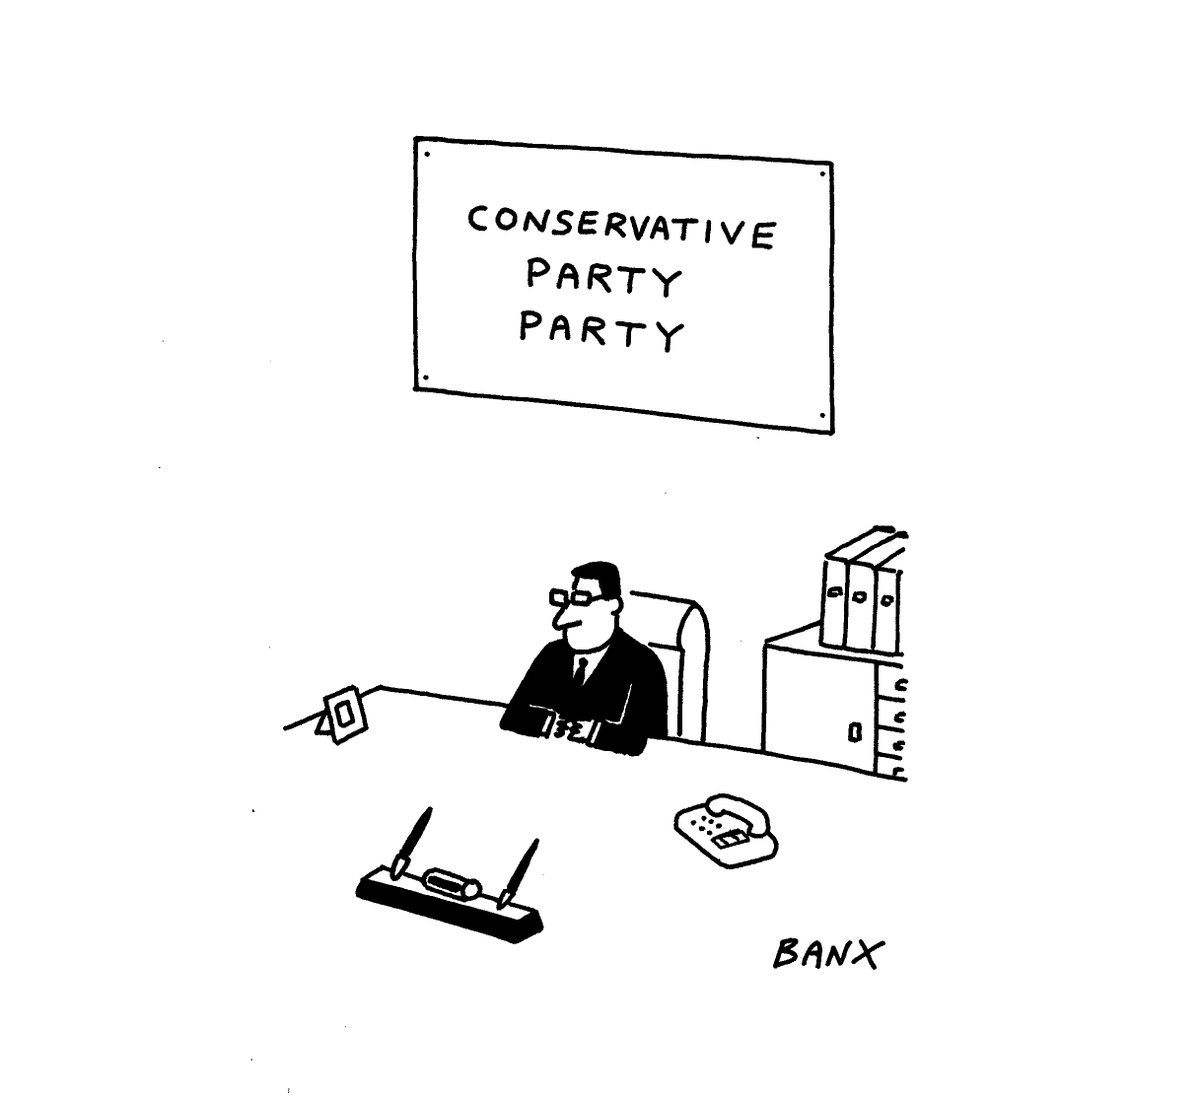 From today's @ftopinion @FT #PartygateVideo #JohnsonLiedToParliament #ToriesOut